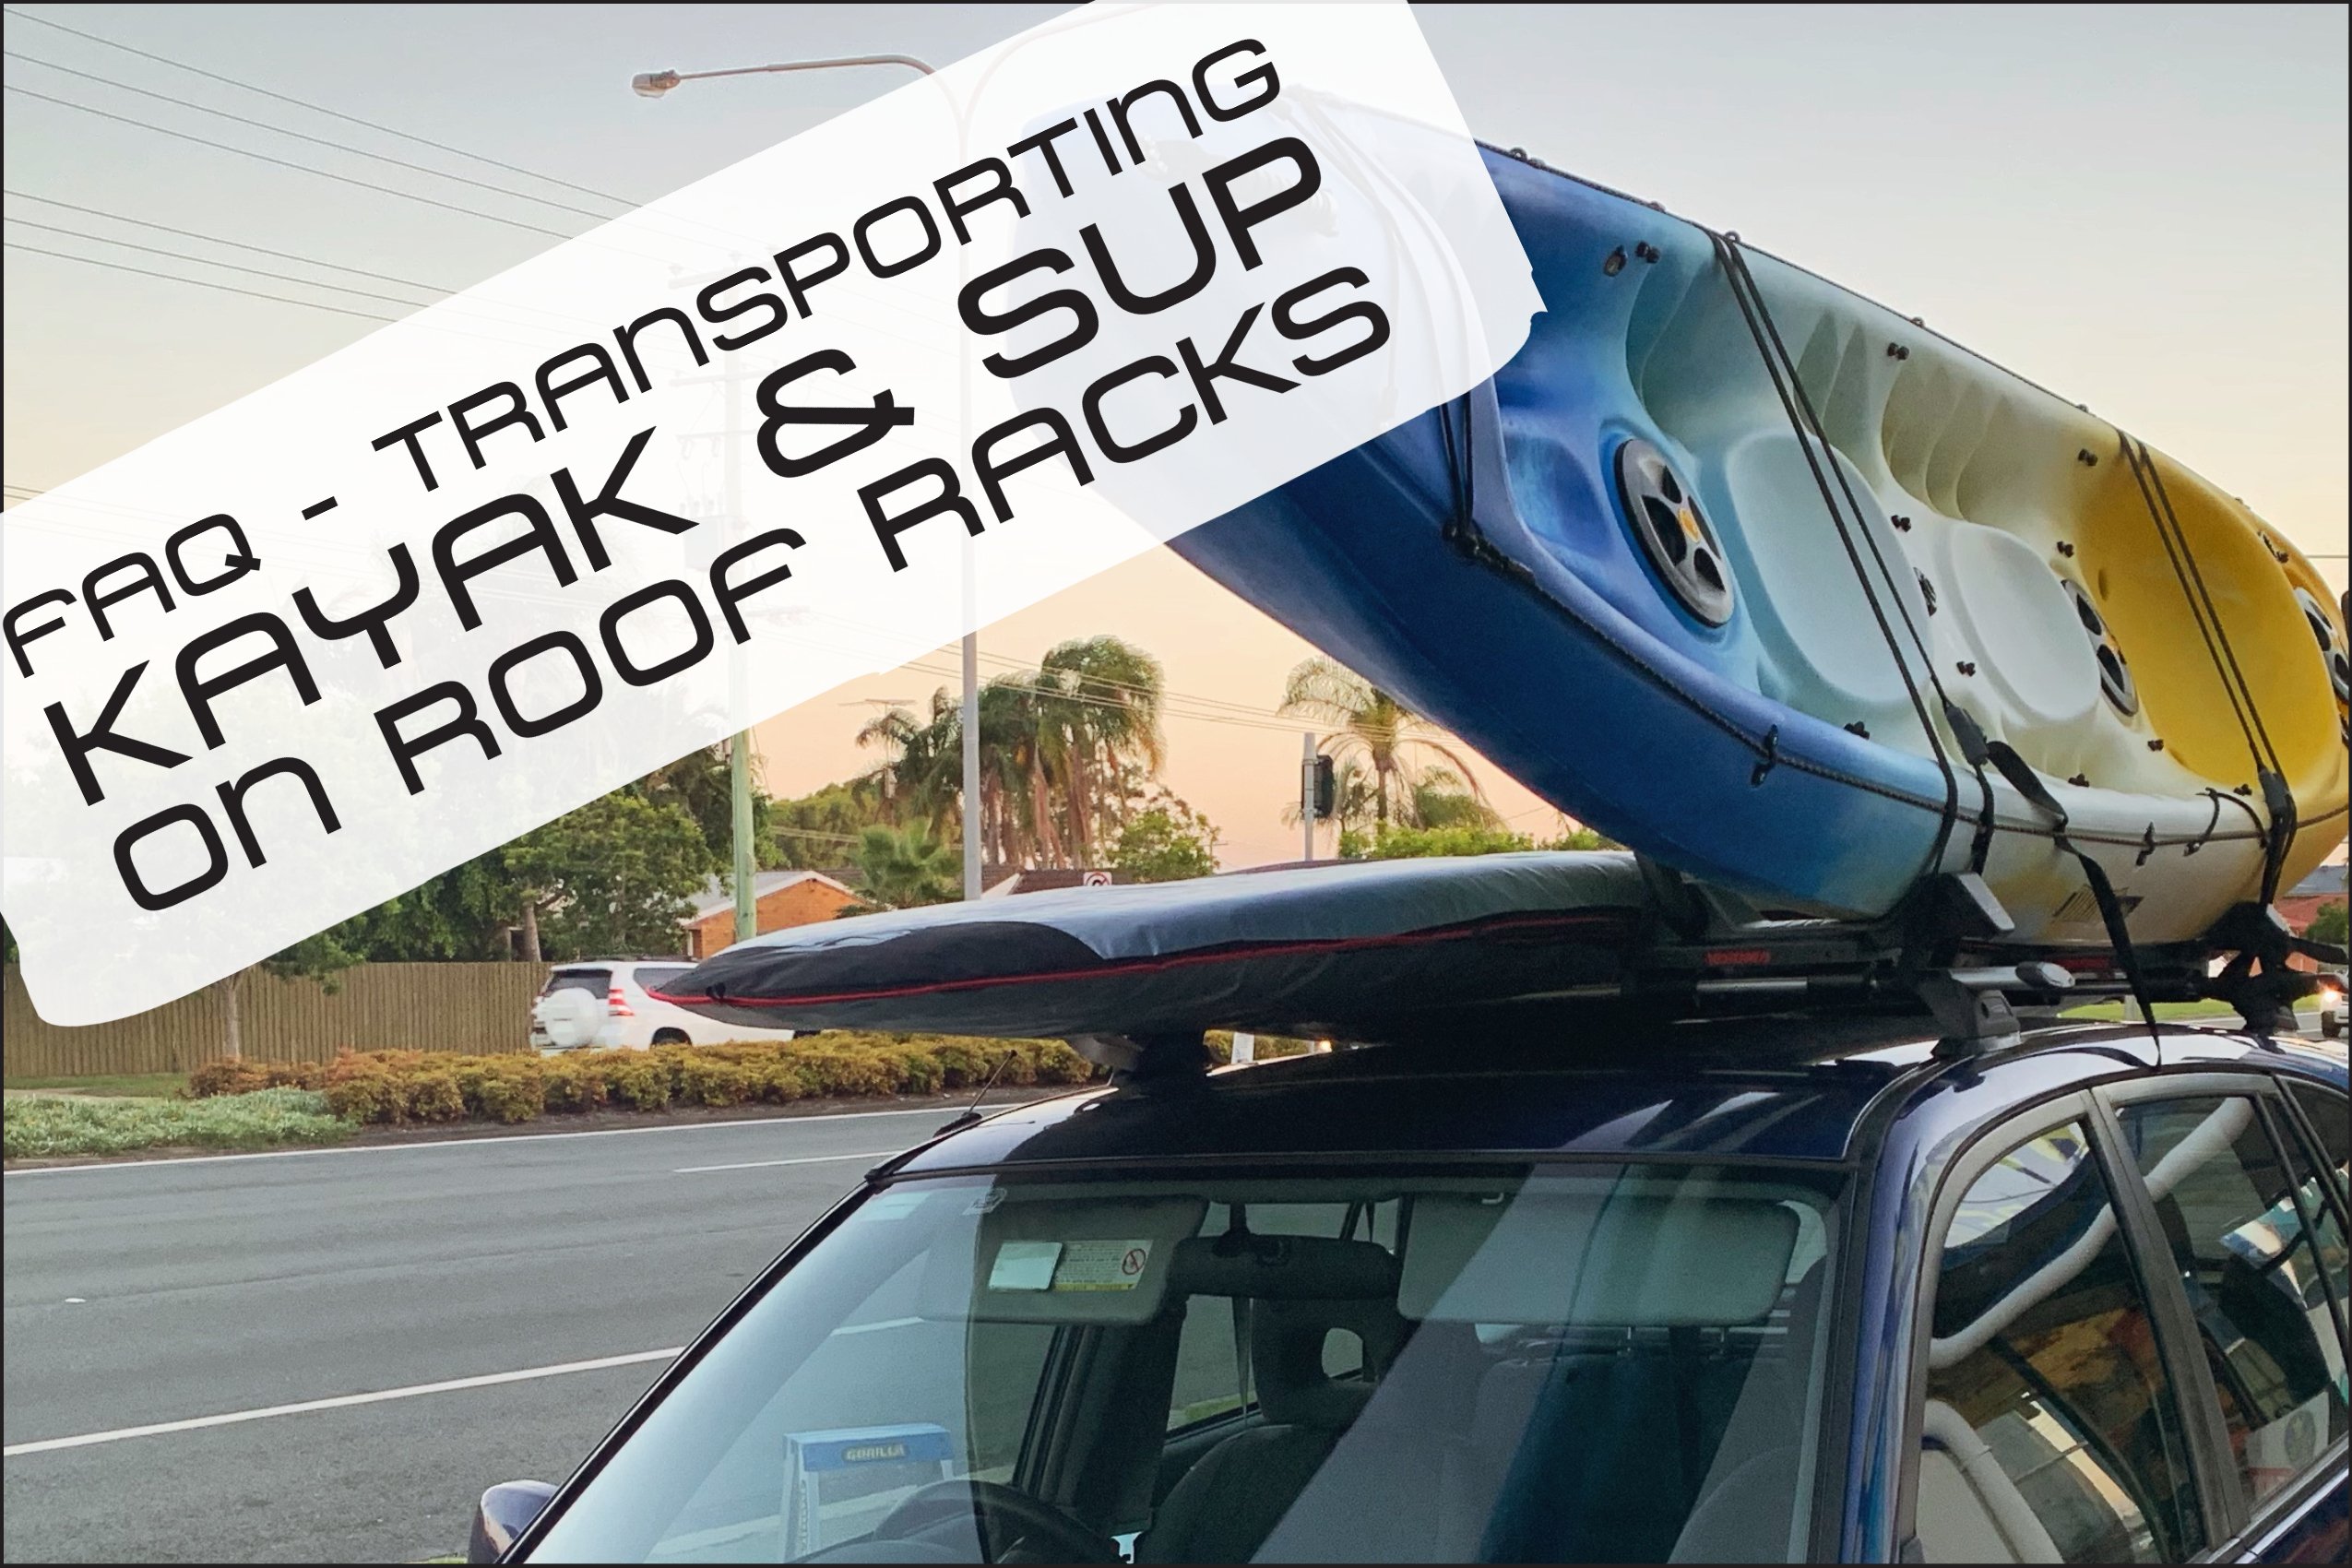 How to Carry a Kayak on Roof Racks